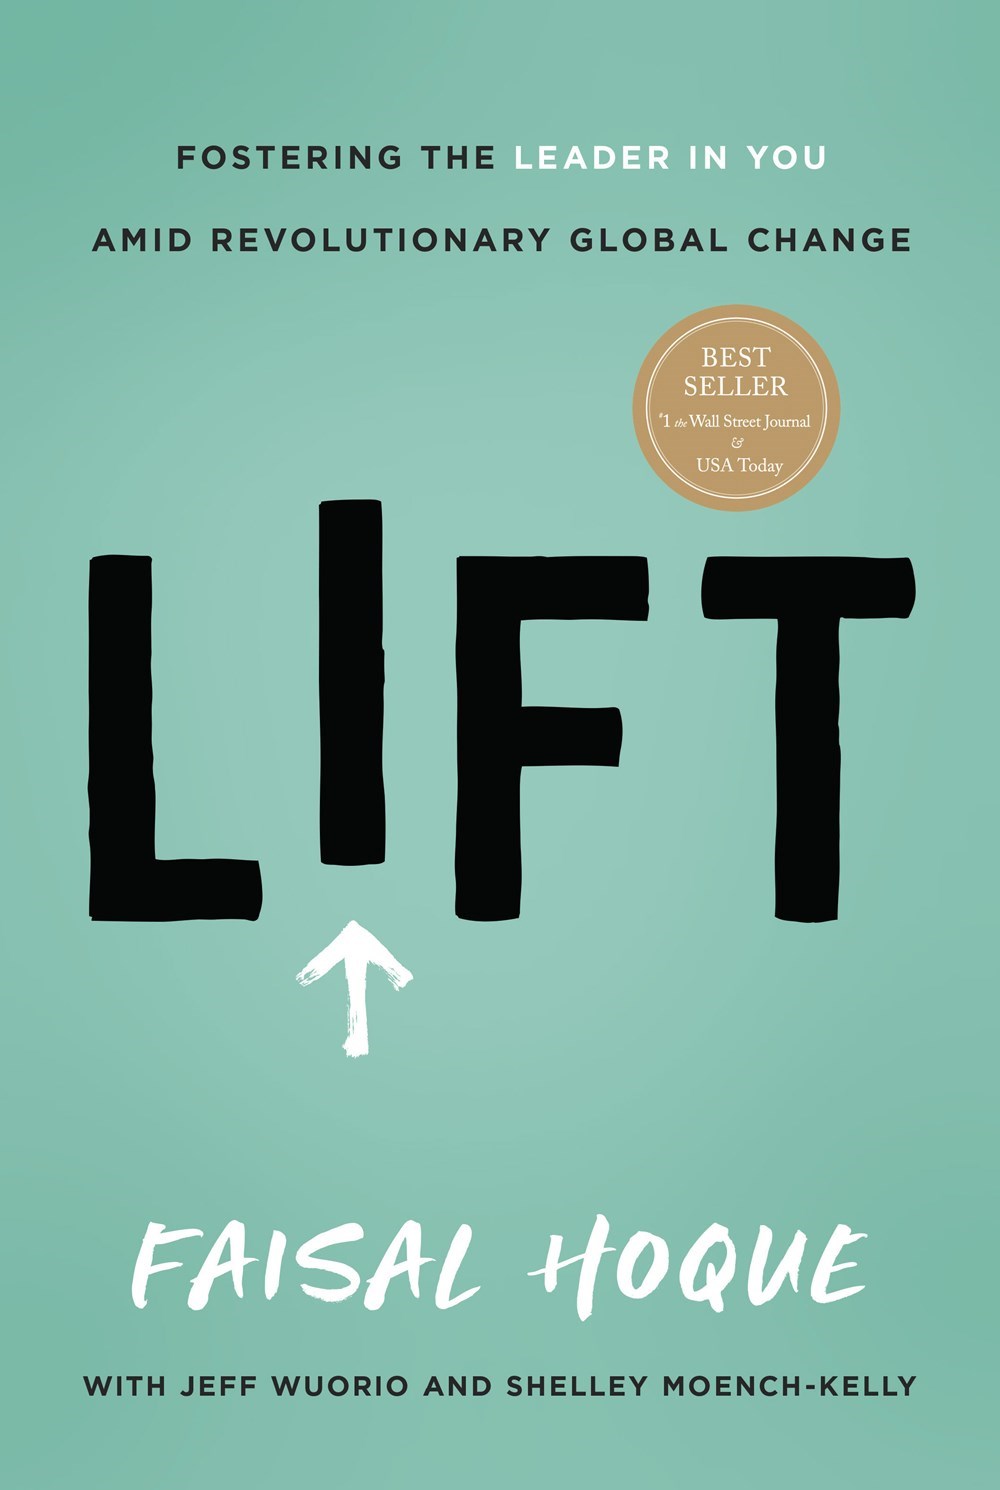 Lift Fostering the Leader in You Amid Revolutionary Global Change